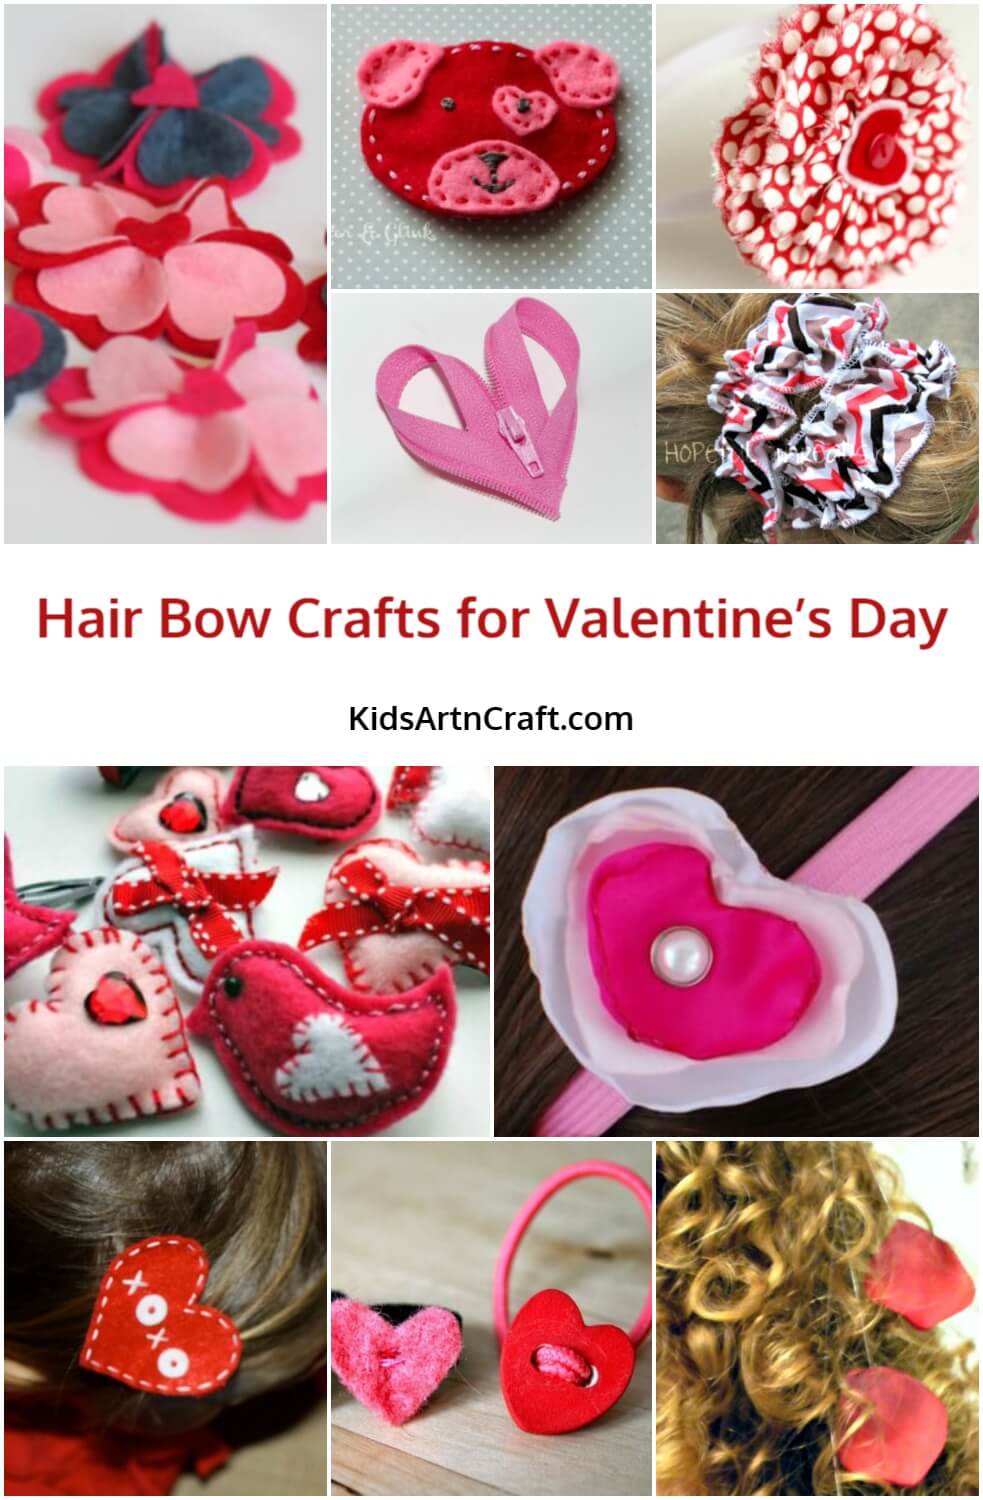 Hair Bow Crafts for Valentine’s Day